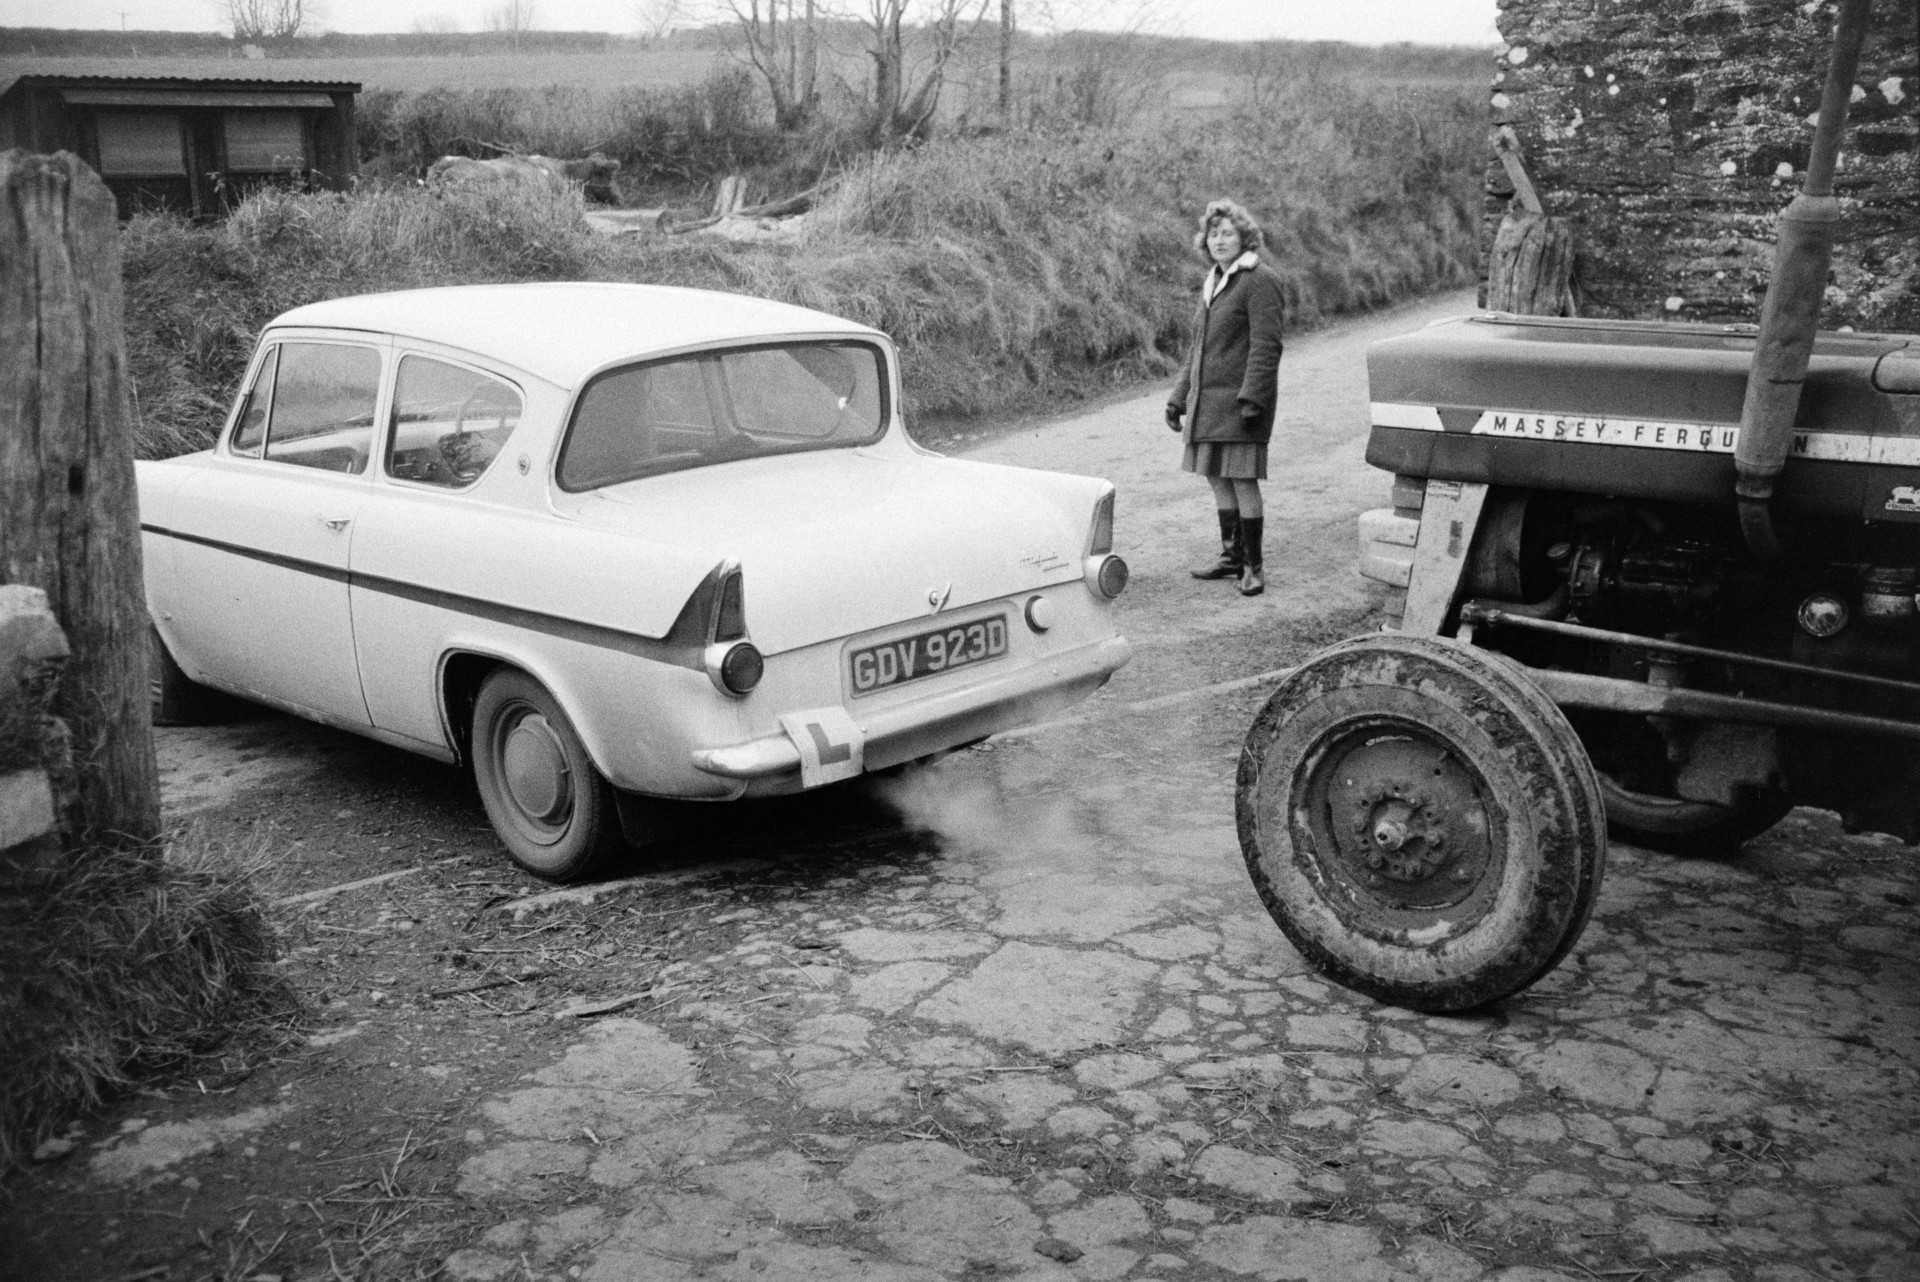 Derek Bright starting Marylin Bourne's car as she watches, at Mill Road Farm, Beaford. A Massey Fergusson tractor is behind the car. The farm was also known as Jeffrys.